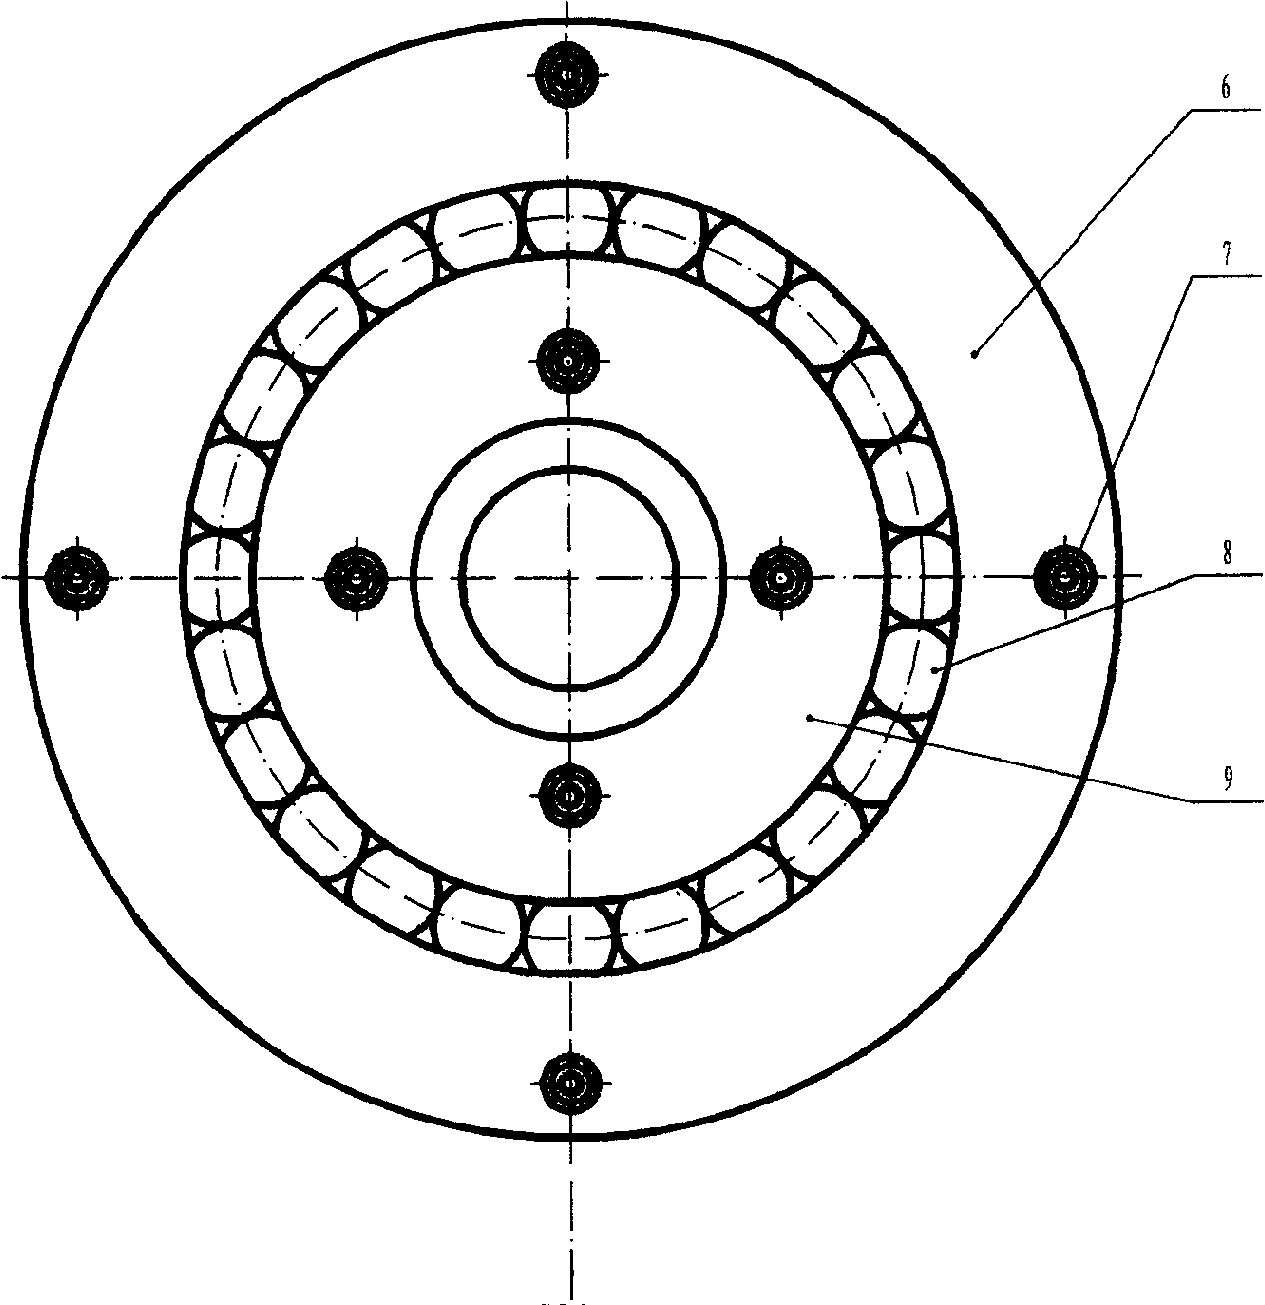 Steel ball roller indexing apparatus